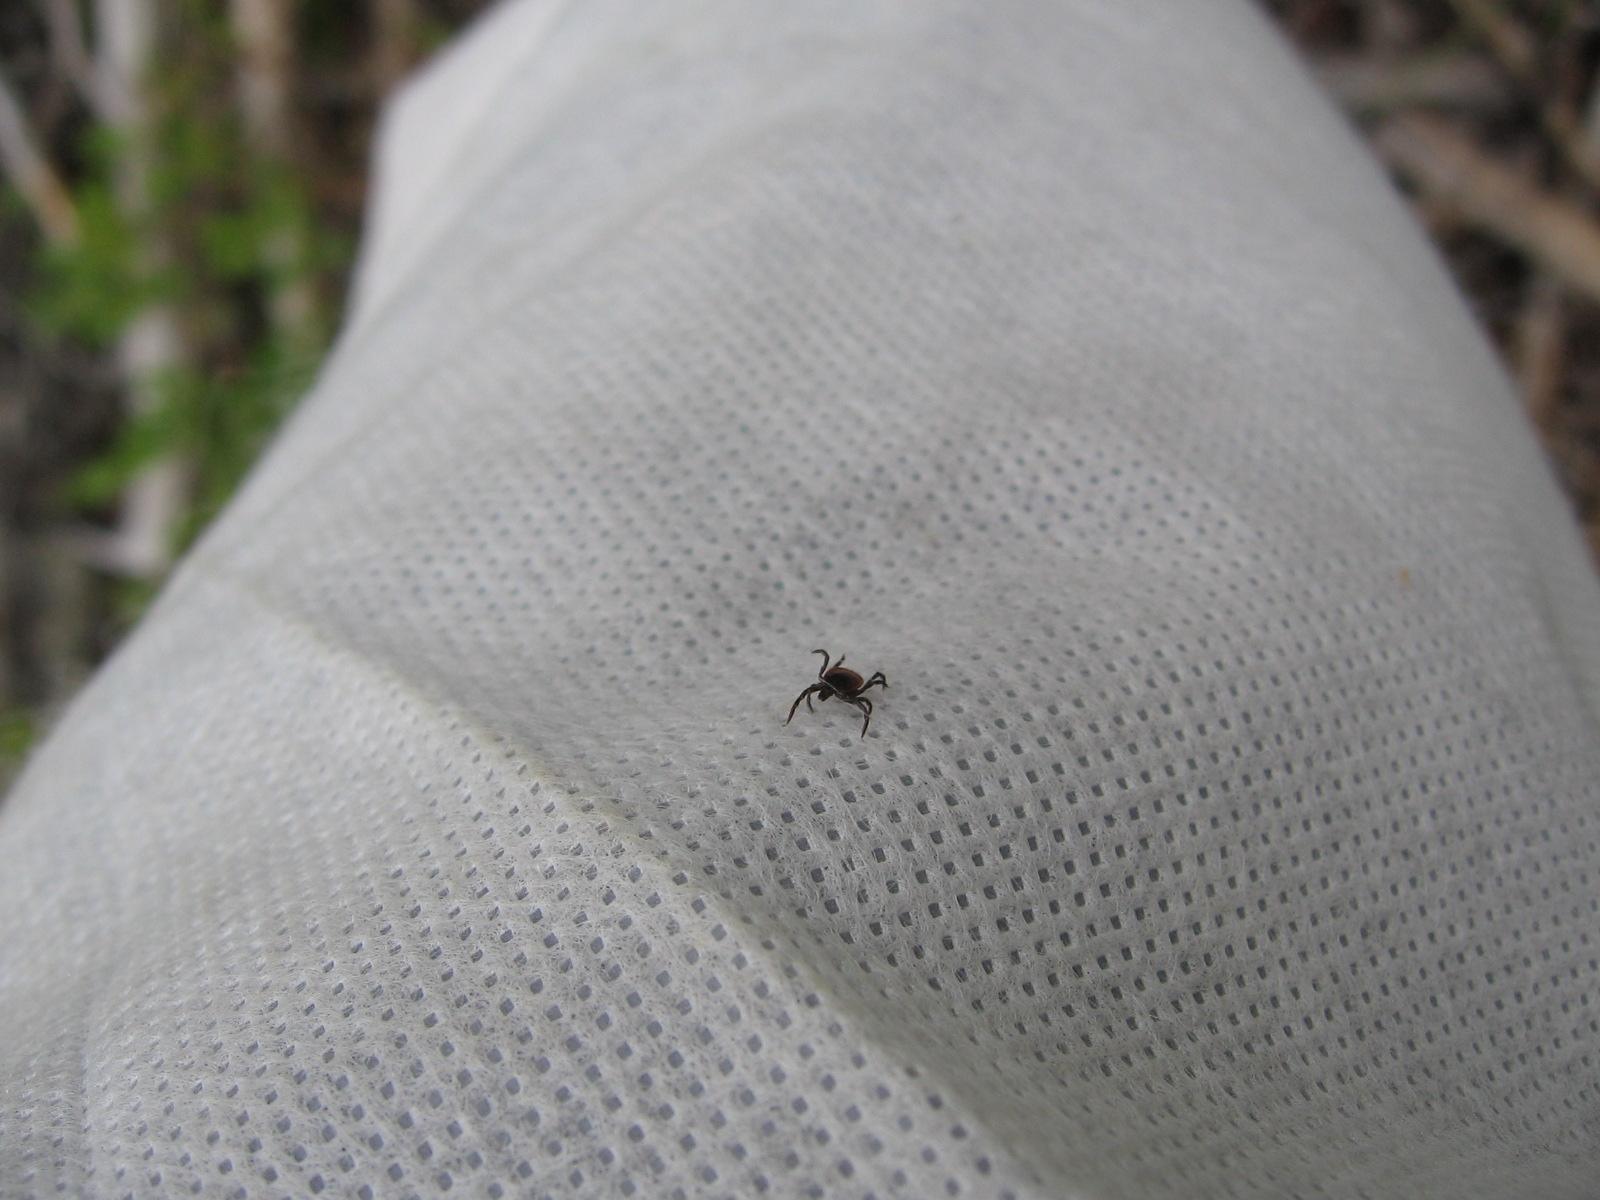 A close up of a the arm of a white flannel suit shows a small, brown tick attached to it.